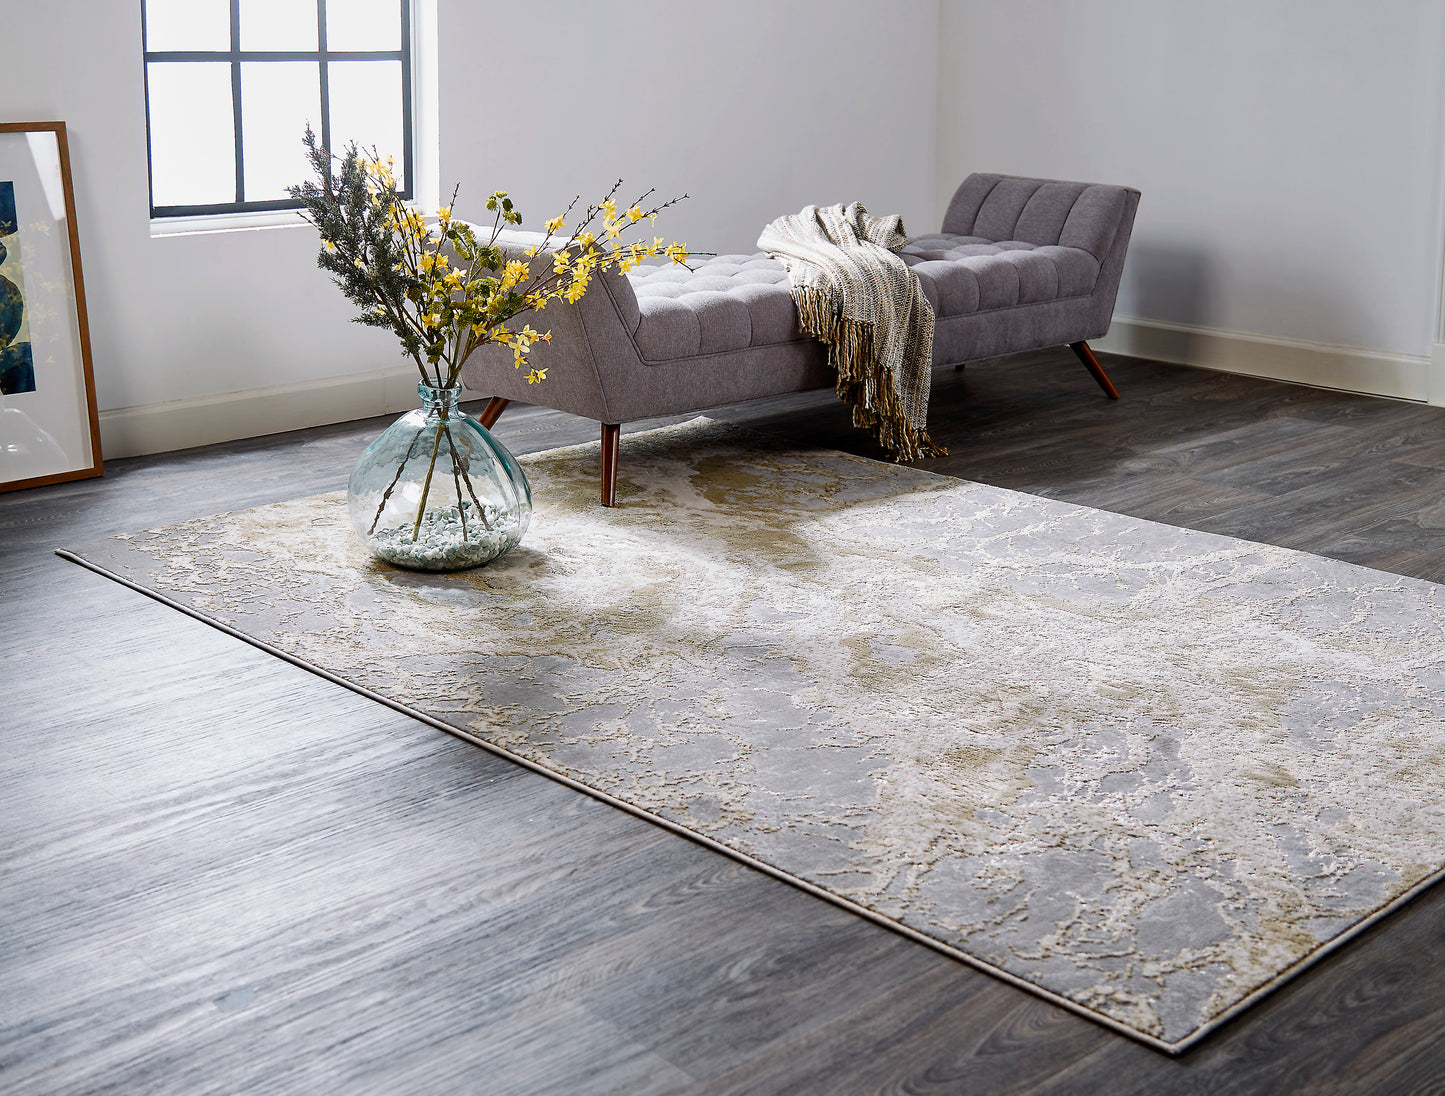 Aura 3563F Machine Made Synthetic Blend Indoor Area Rug by Feizy Rugs